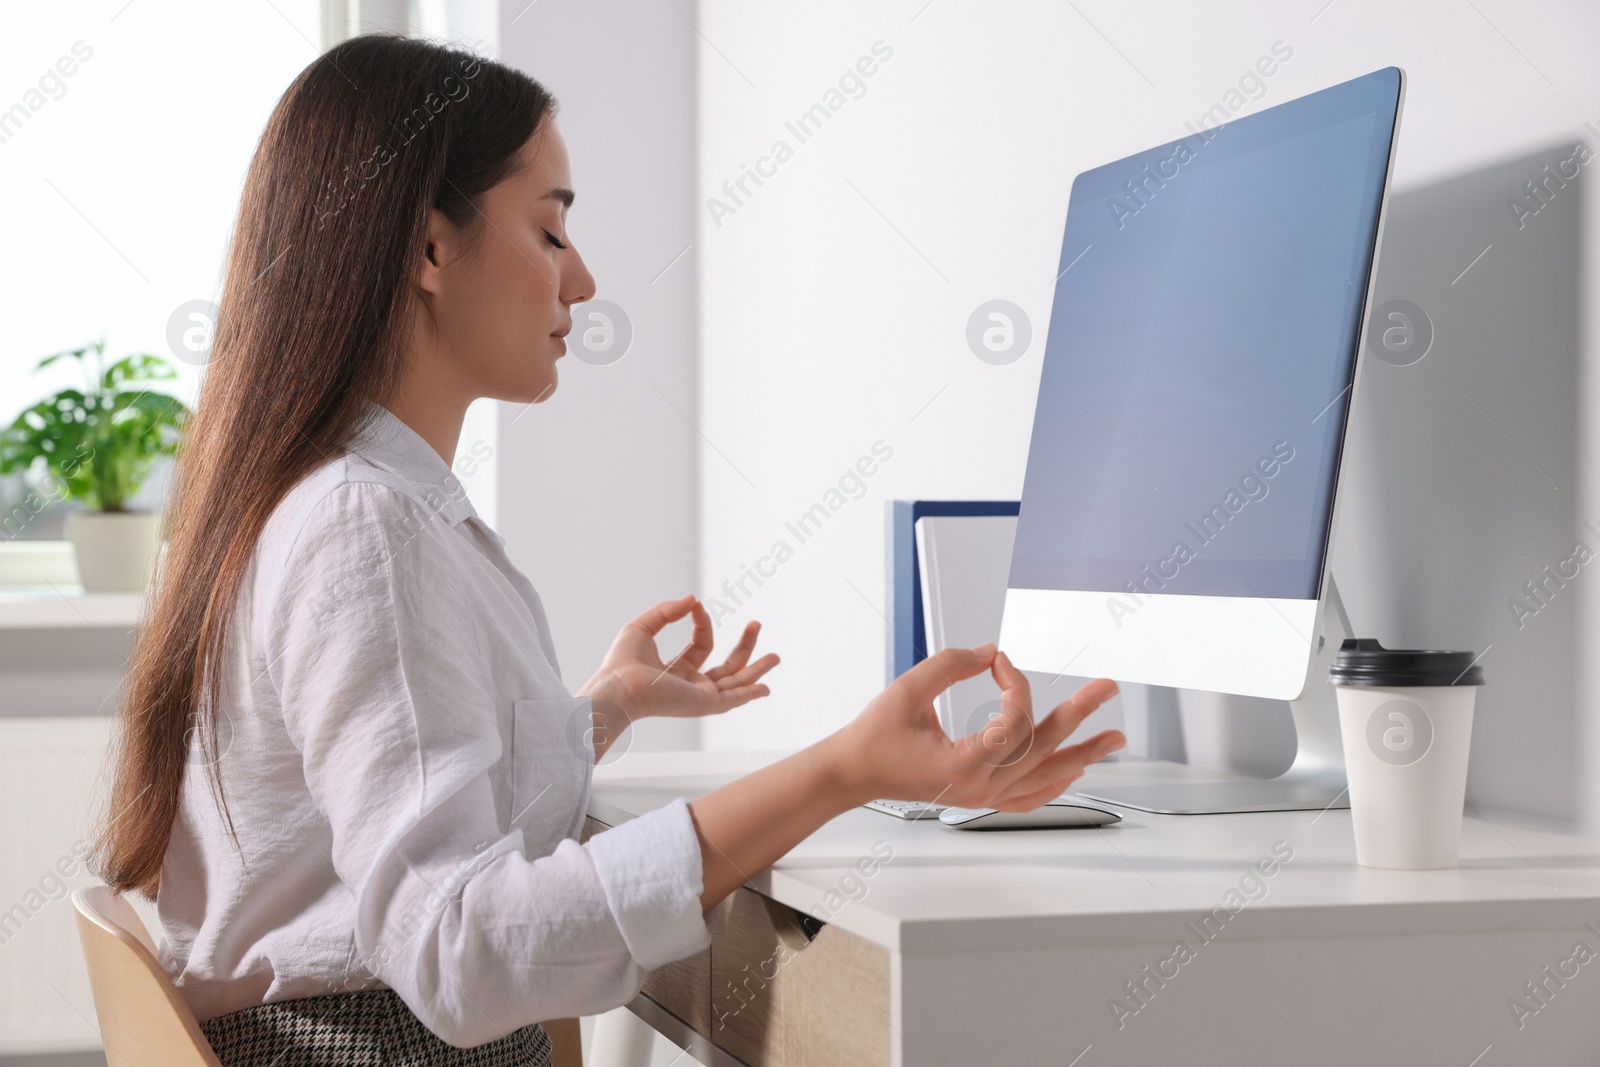 Photo of Find zen. Woman taking break from work at table in room